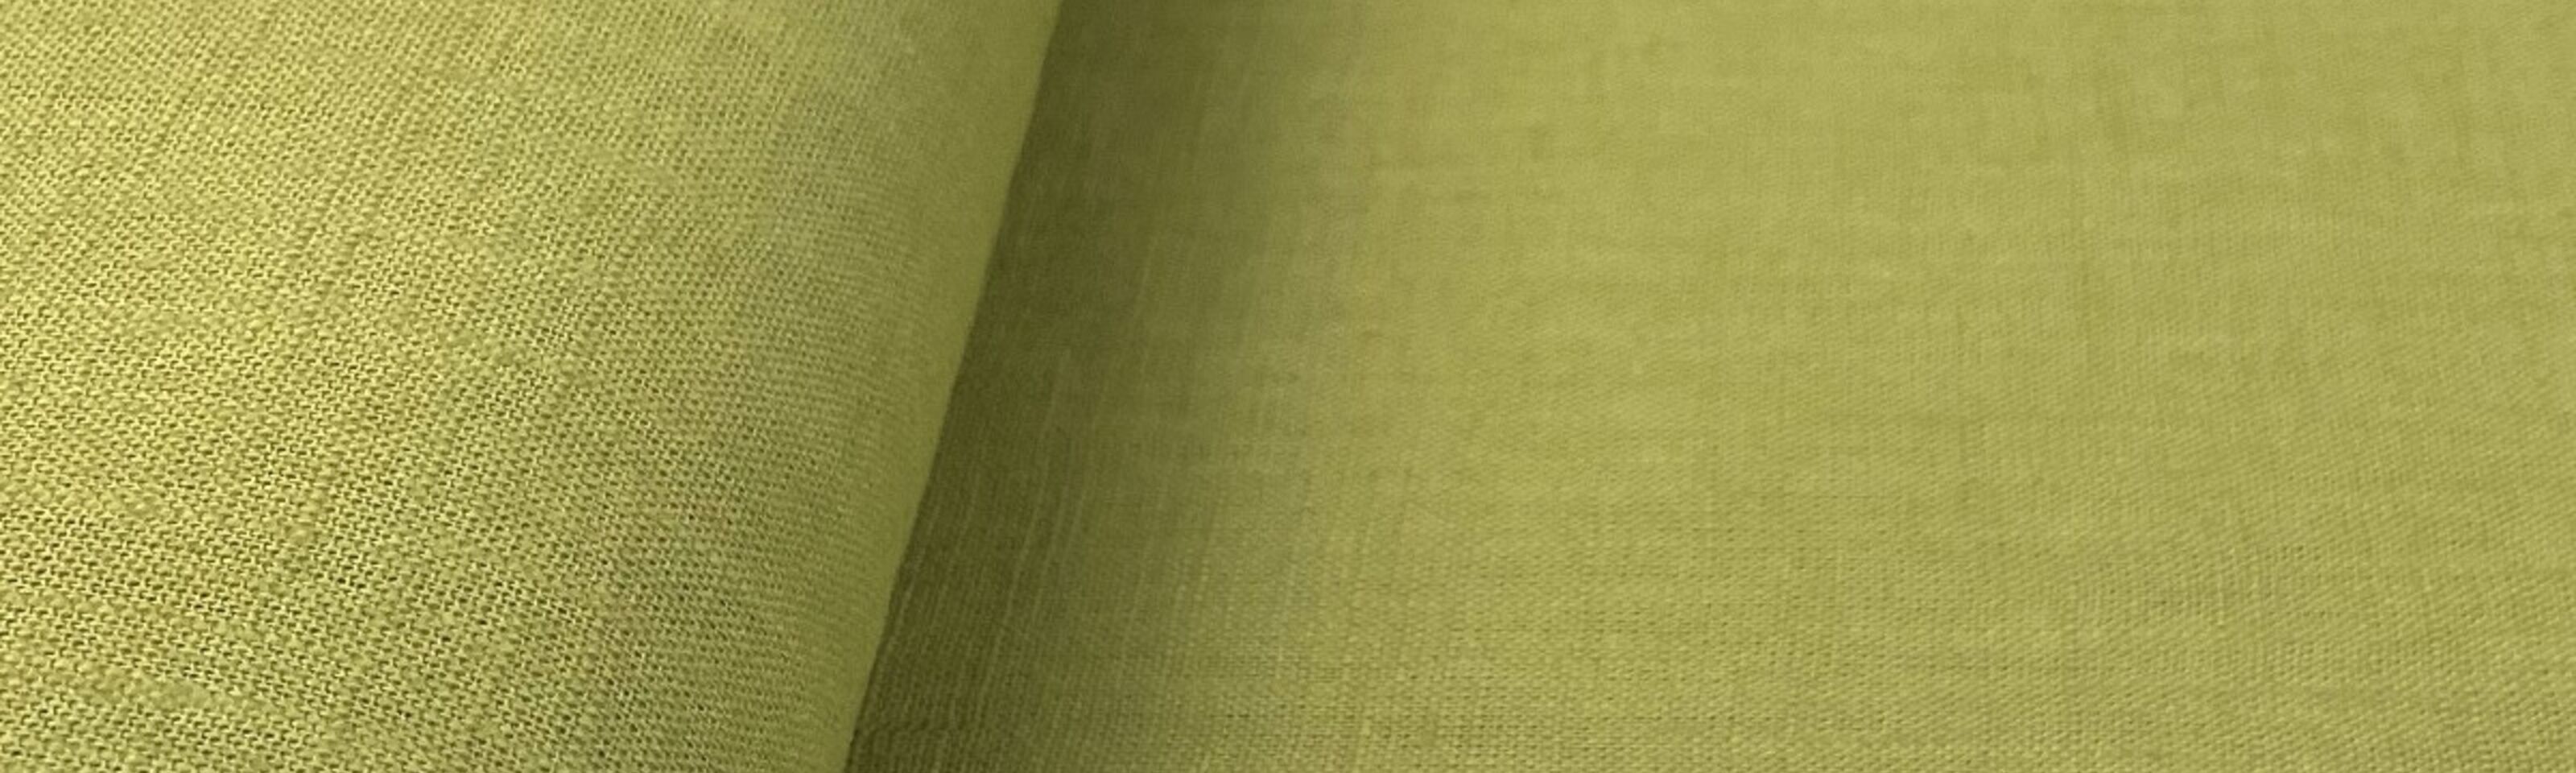 Pure Linen - Chartreuse - 100% Plain Dyed Linen Suiting Fabric - CLose Up Roll Fabric Photo 